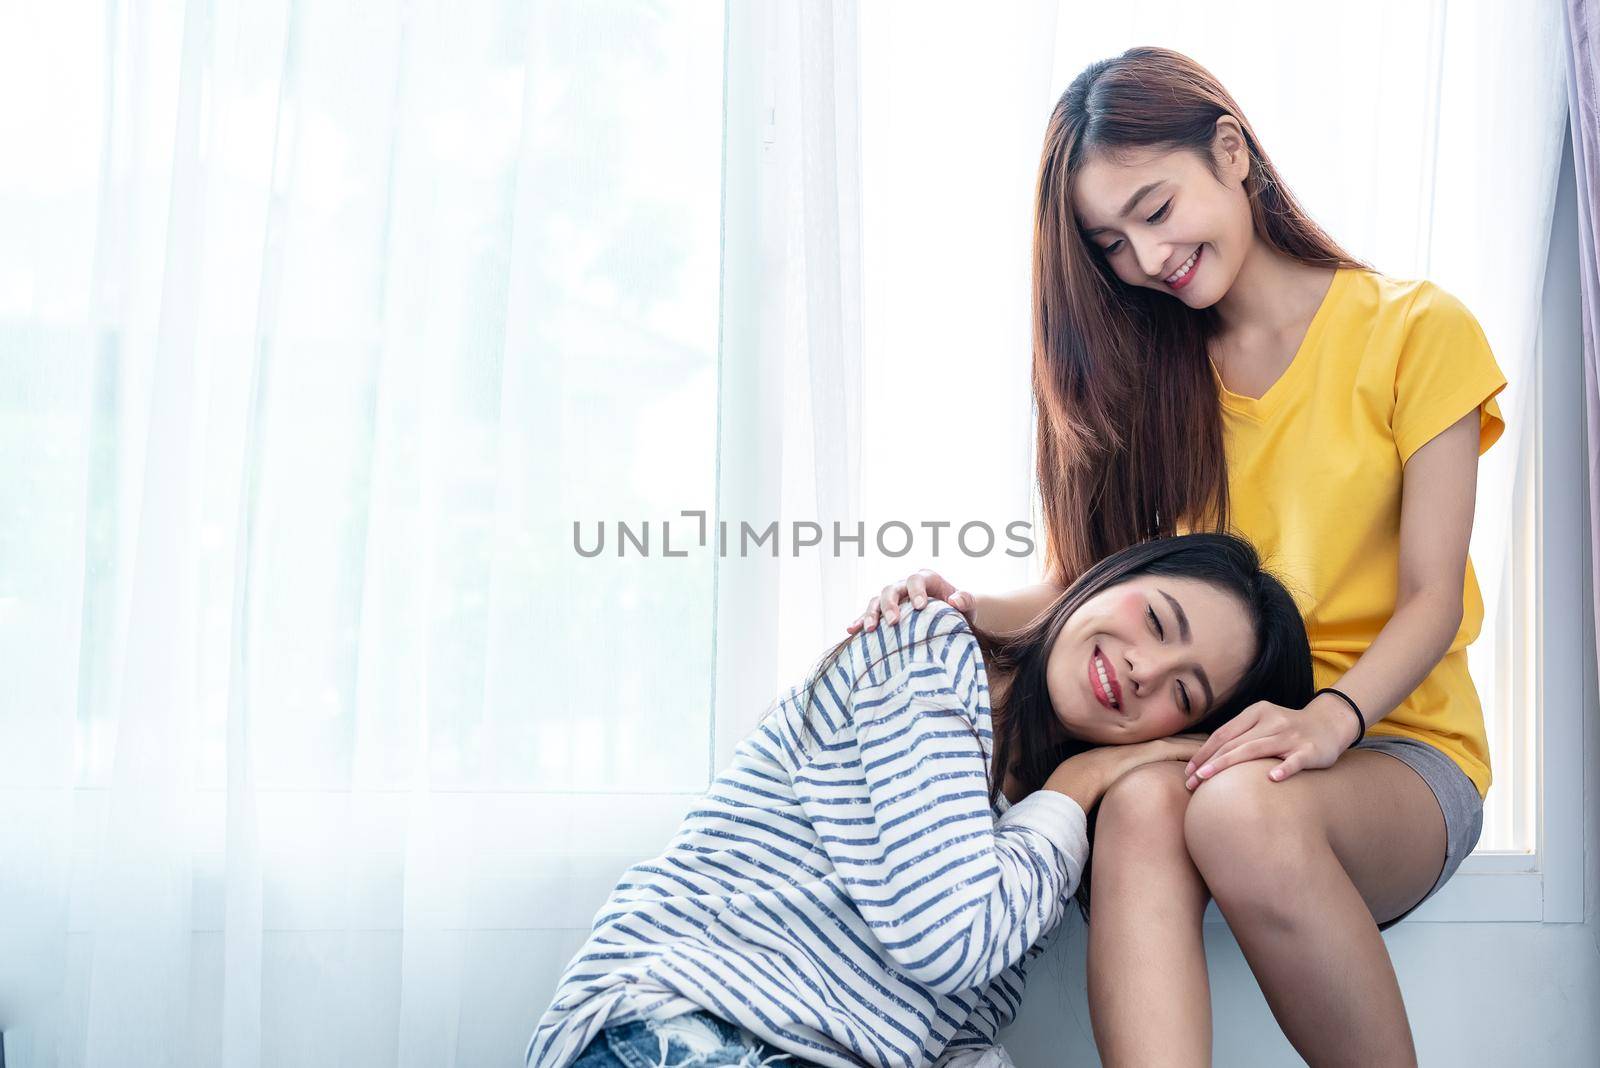 Asian couple take care together near white window with soft sunshine in happiness moment together. People and Lifestyles concept. Lesbian and friendships theme. LGBT pride theme.